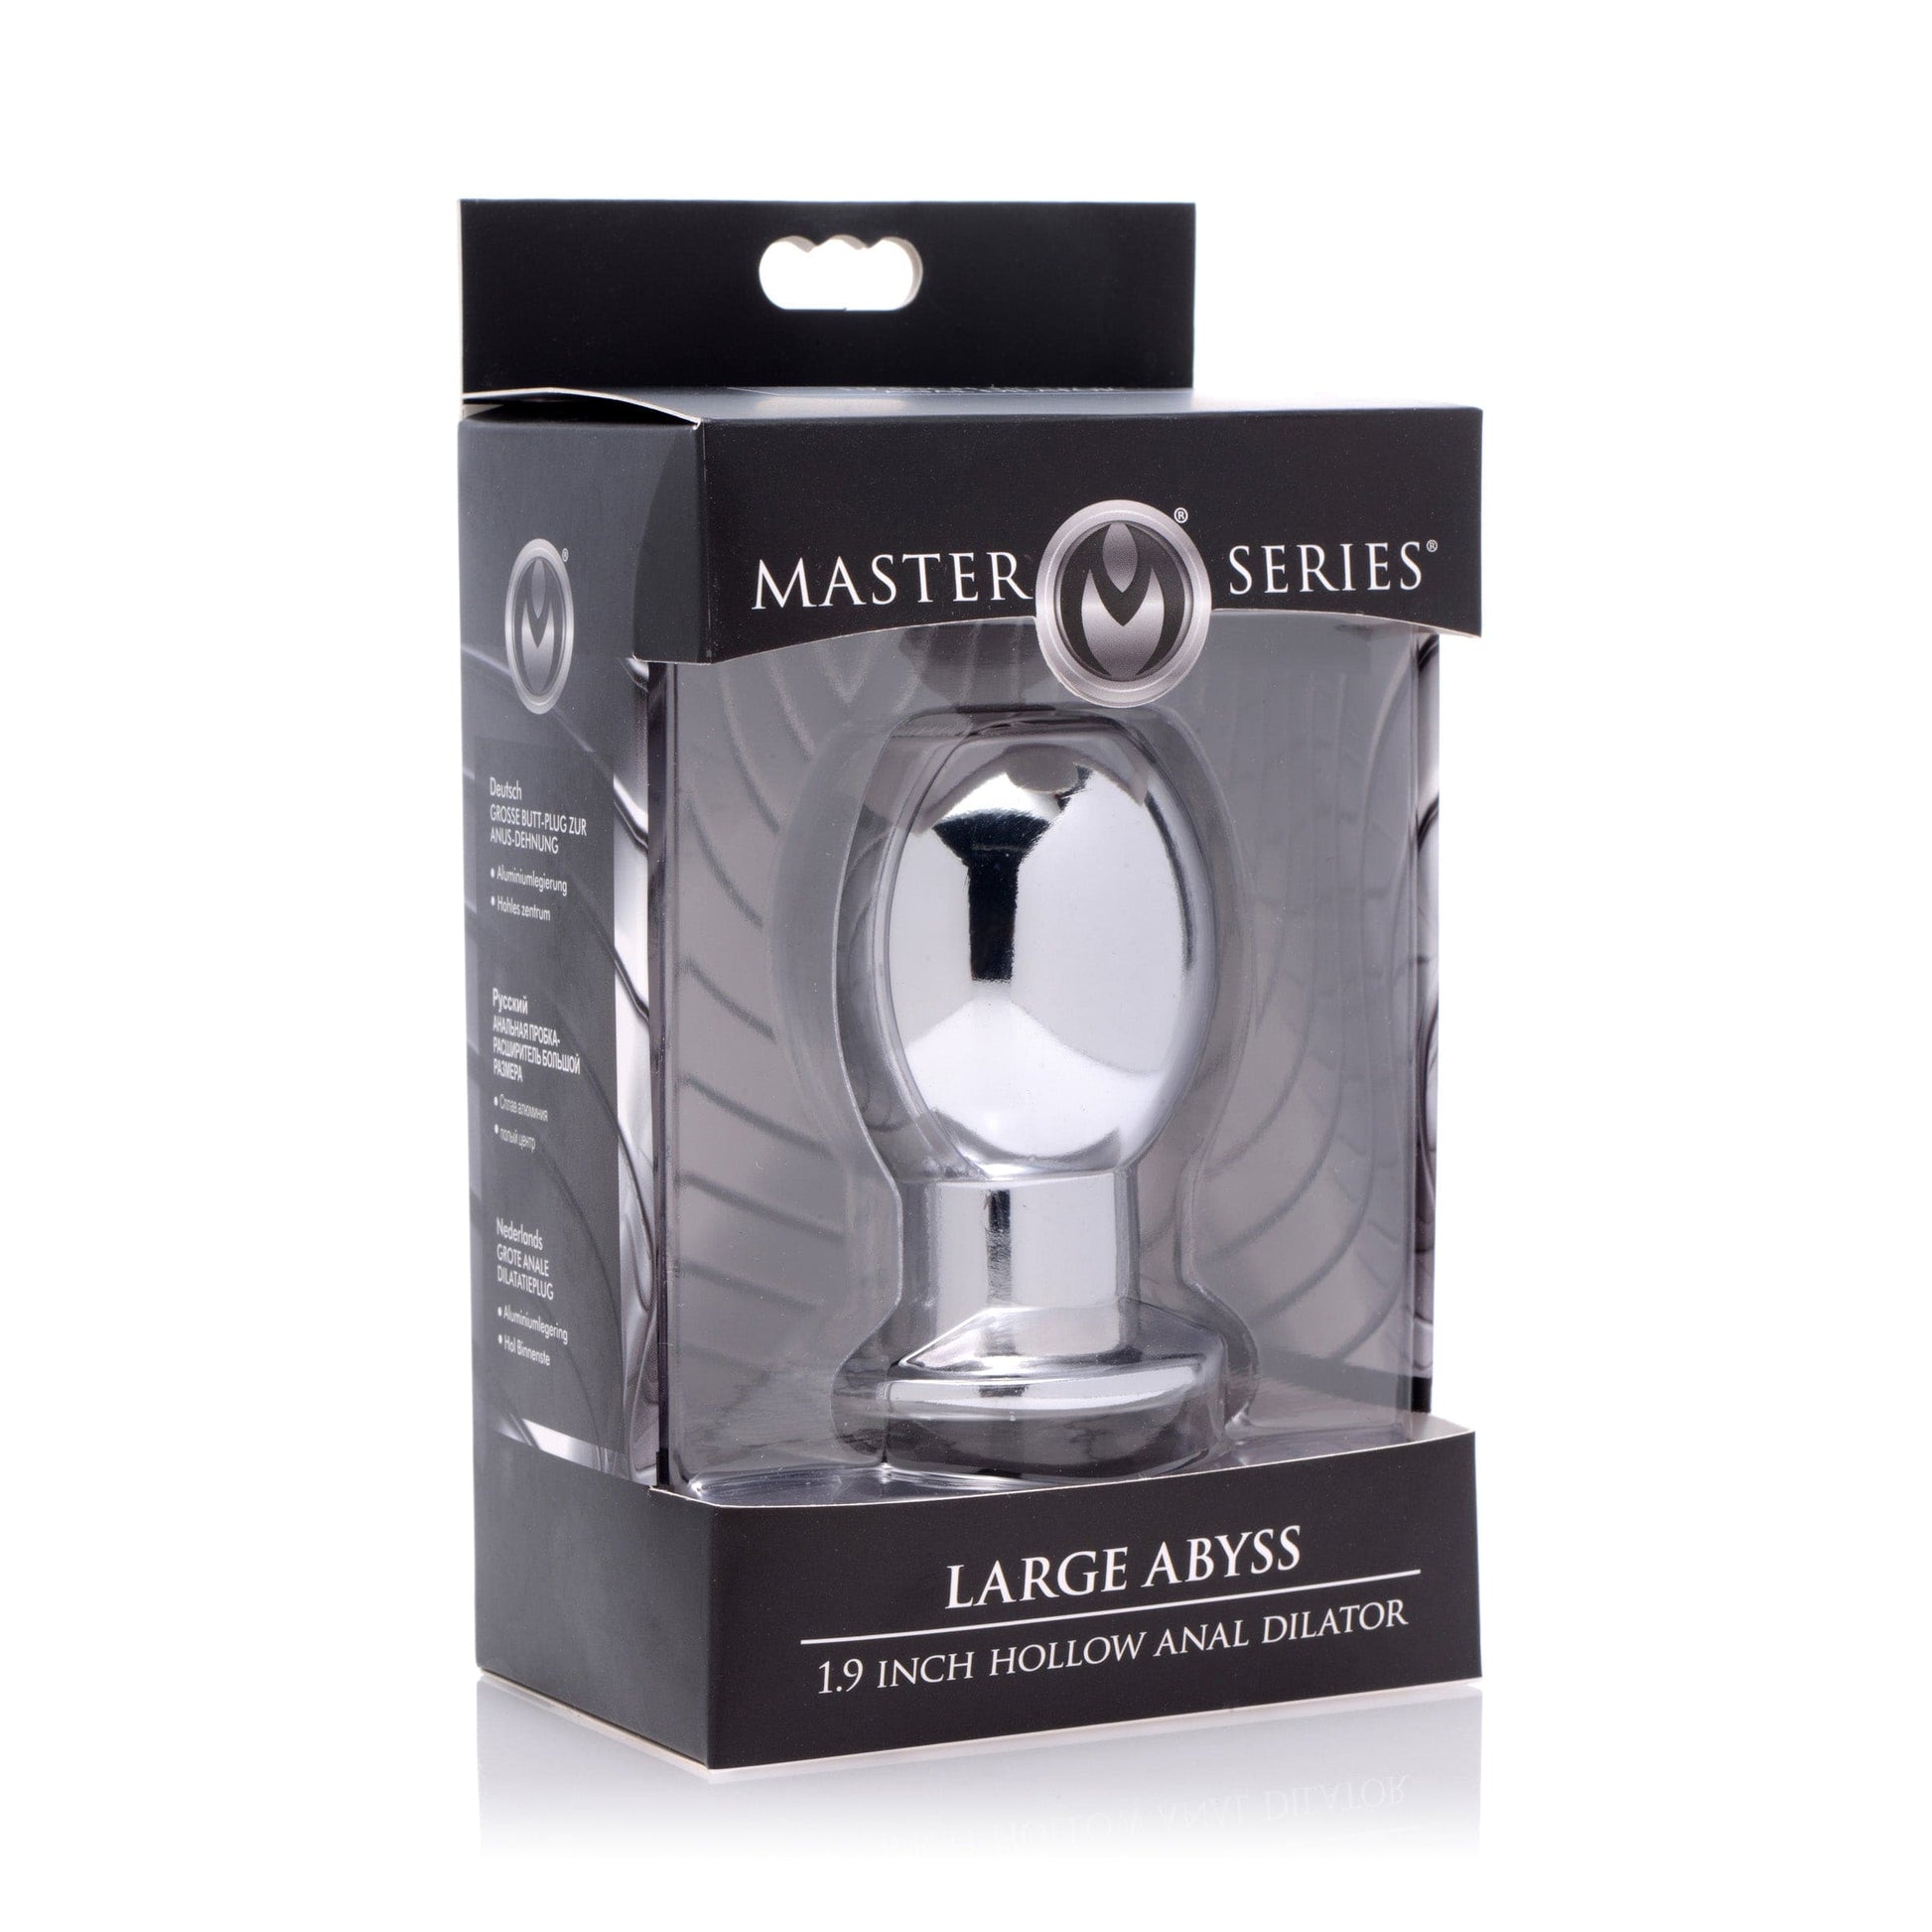 Master Series Hollow Plug Large Abyss 1.9 Inch Hollow Anal Dilator at the Haus of Shag